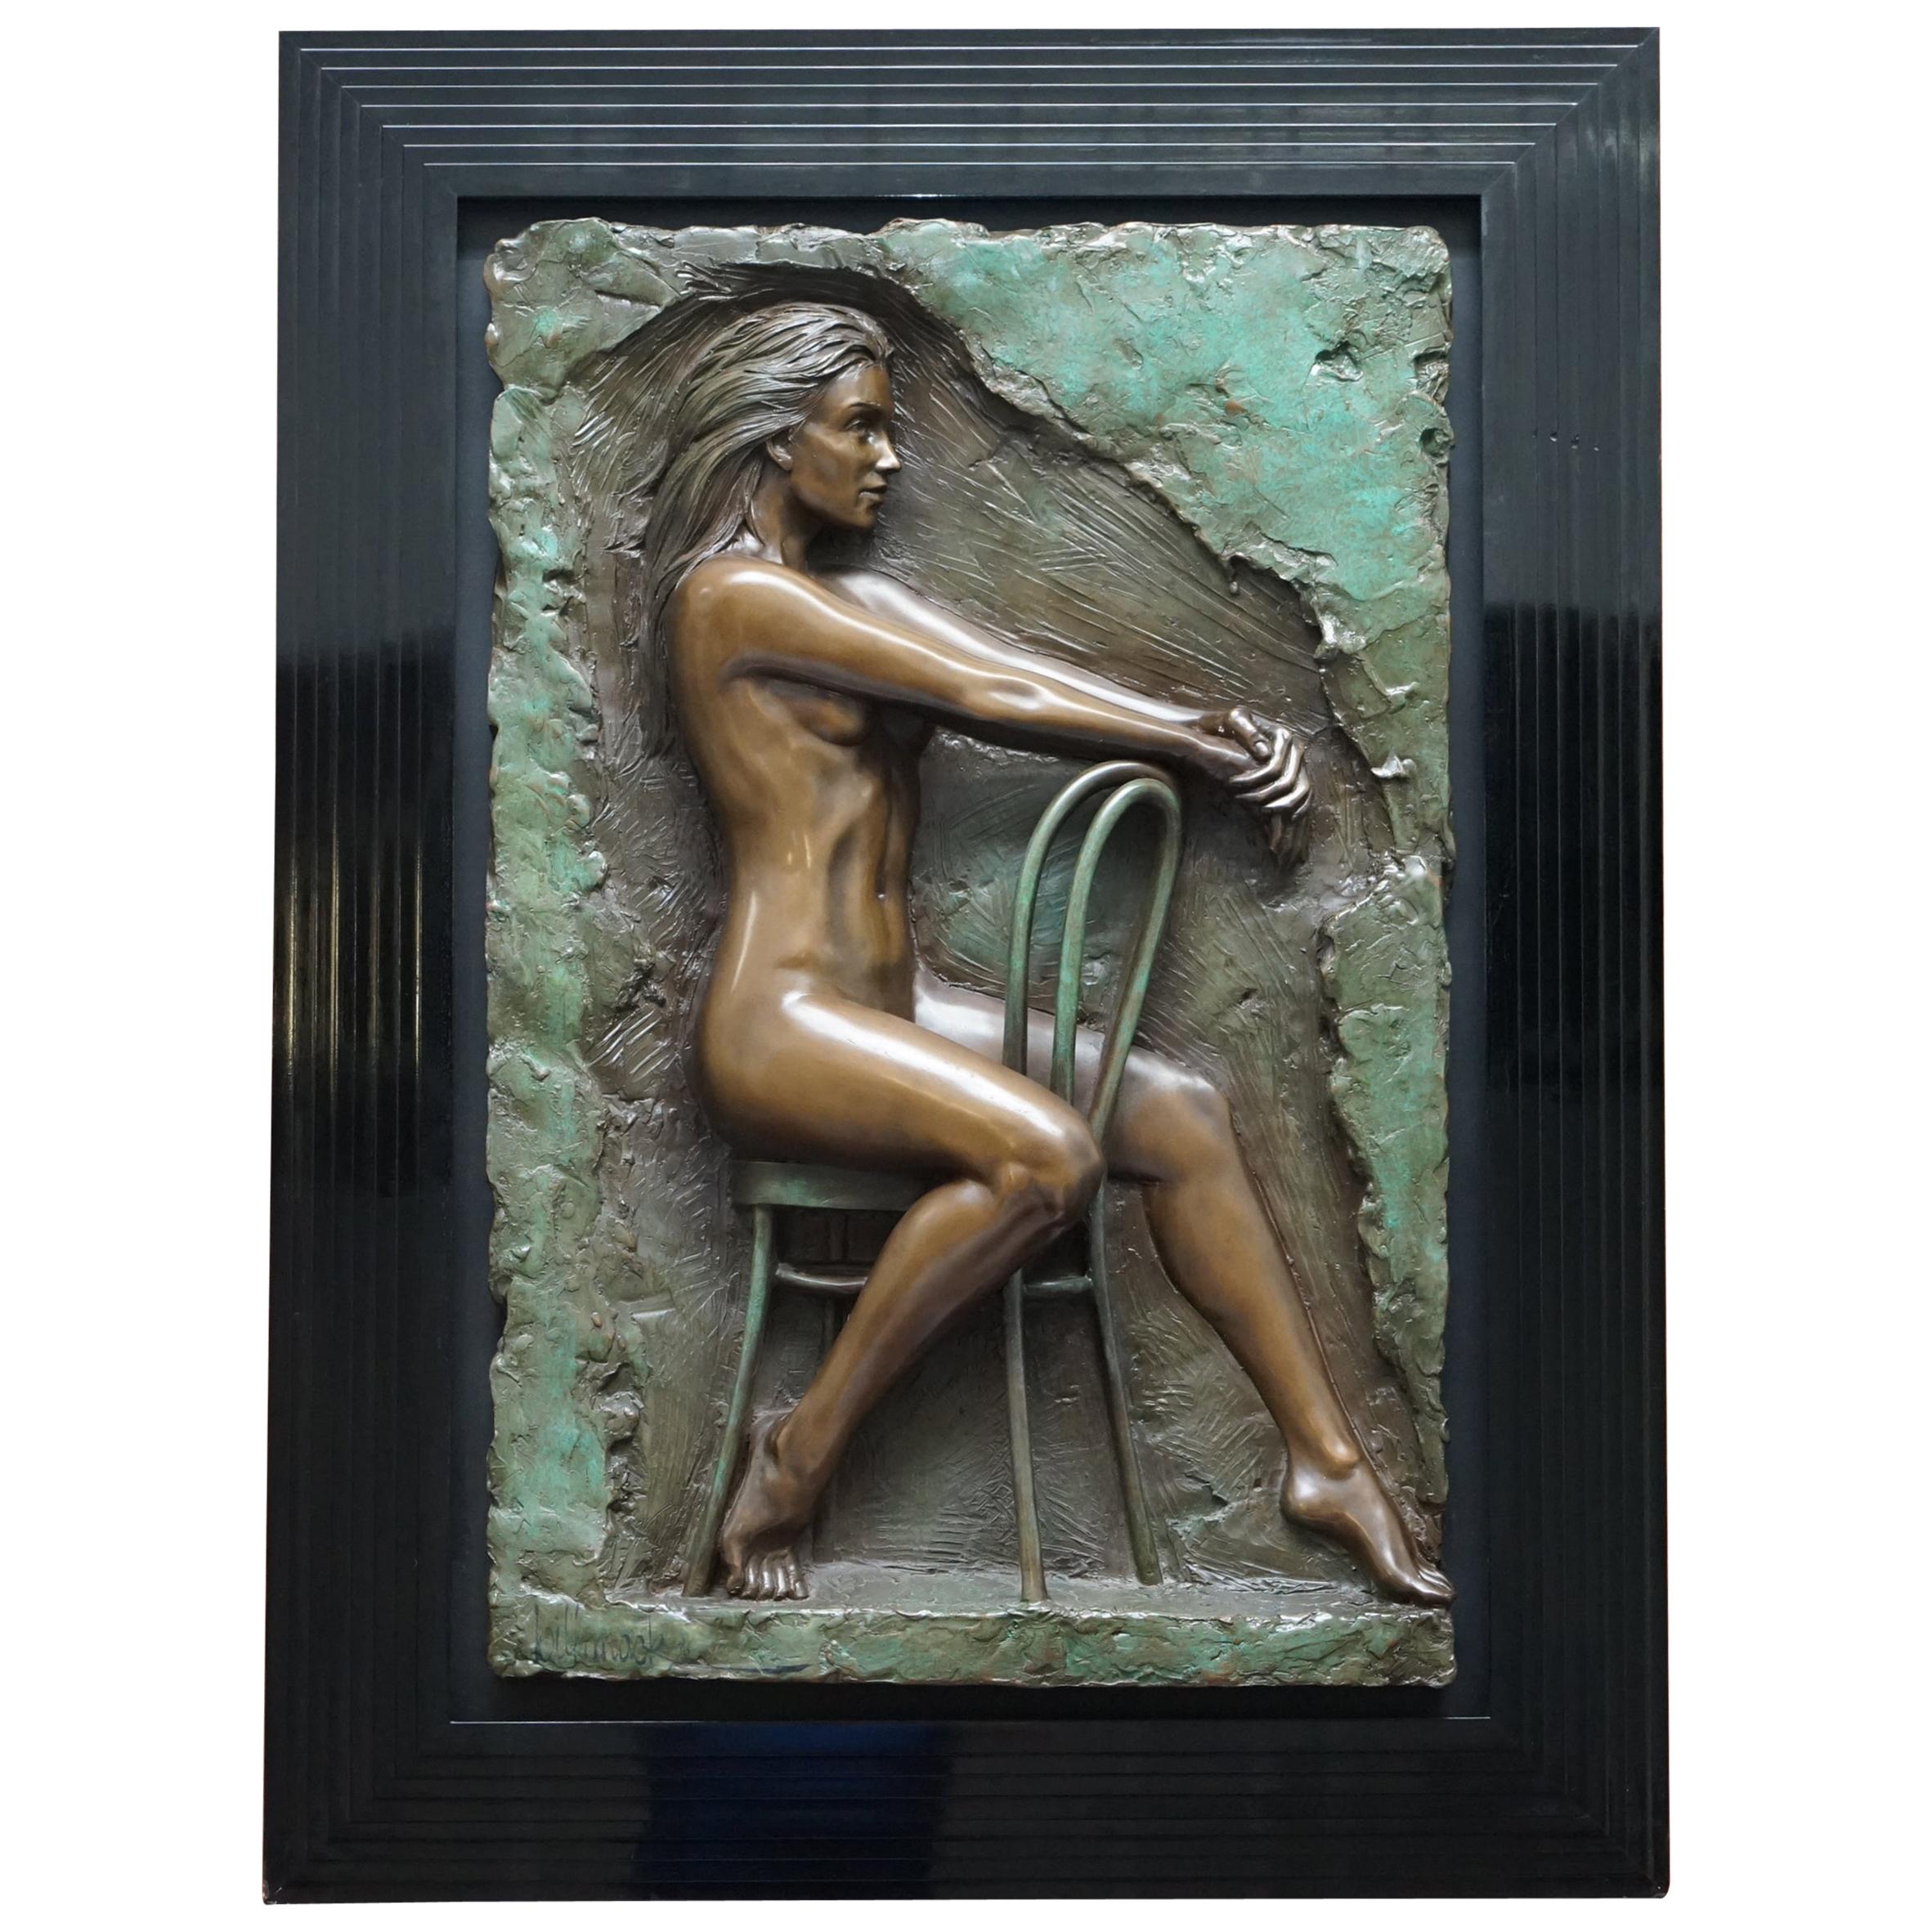 Limited Edition 78/95 Bill Mack Signed Bronze Statue Picture Titled Solitude For Sale